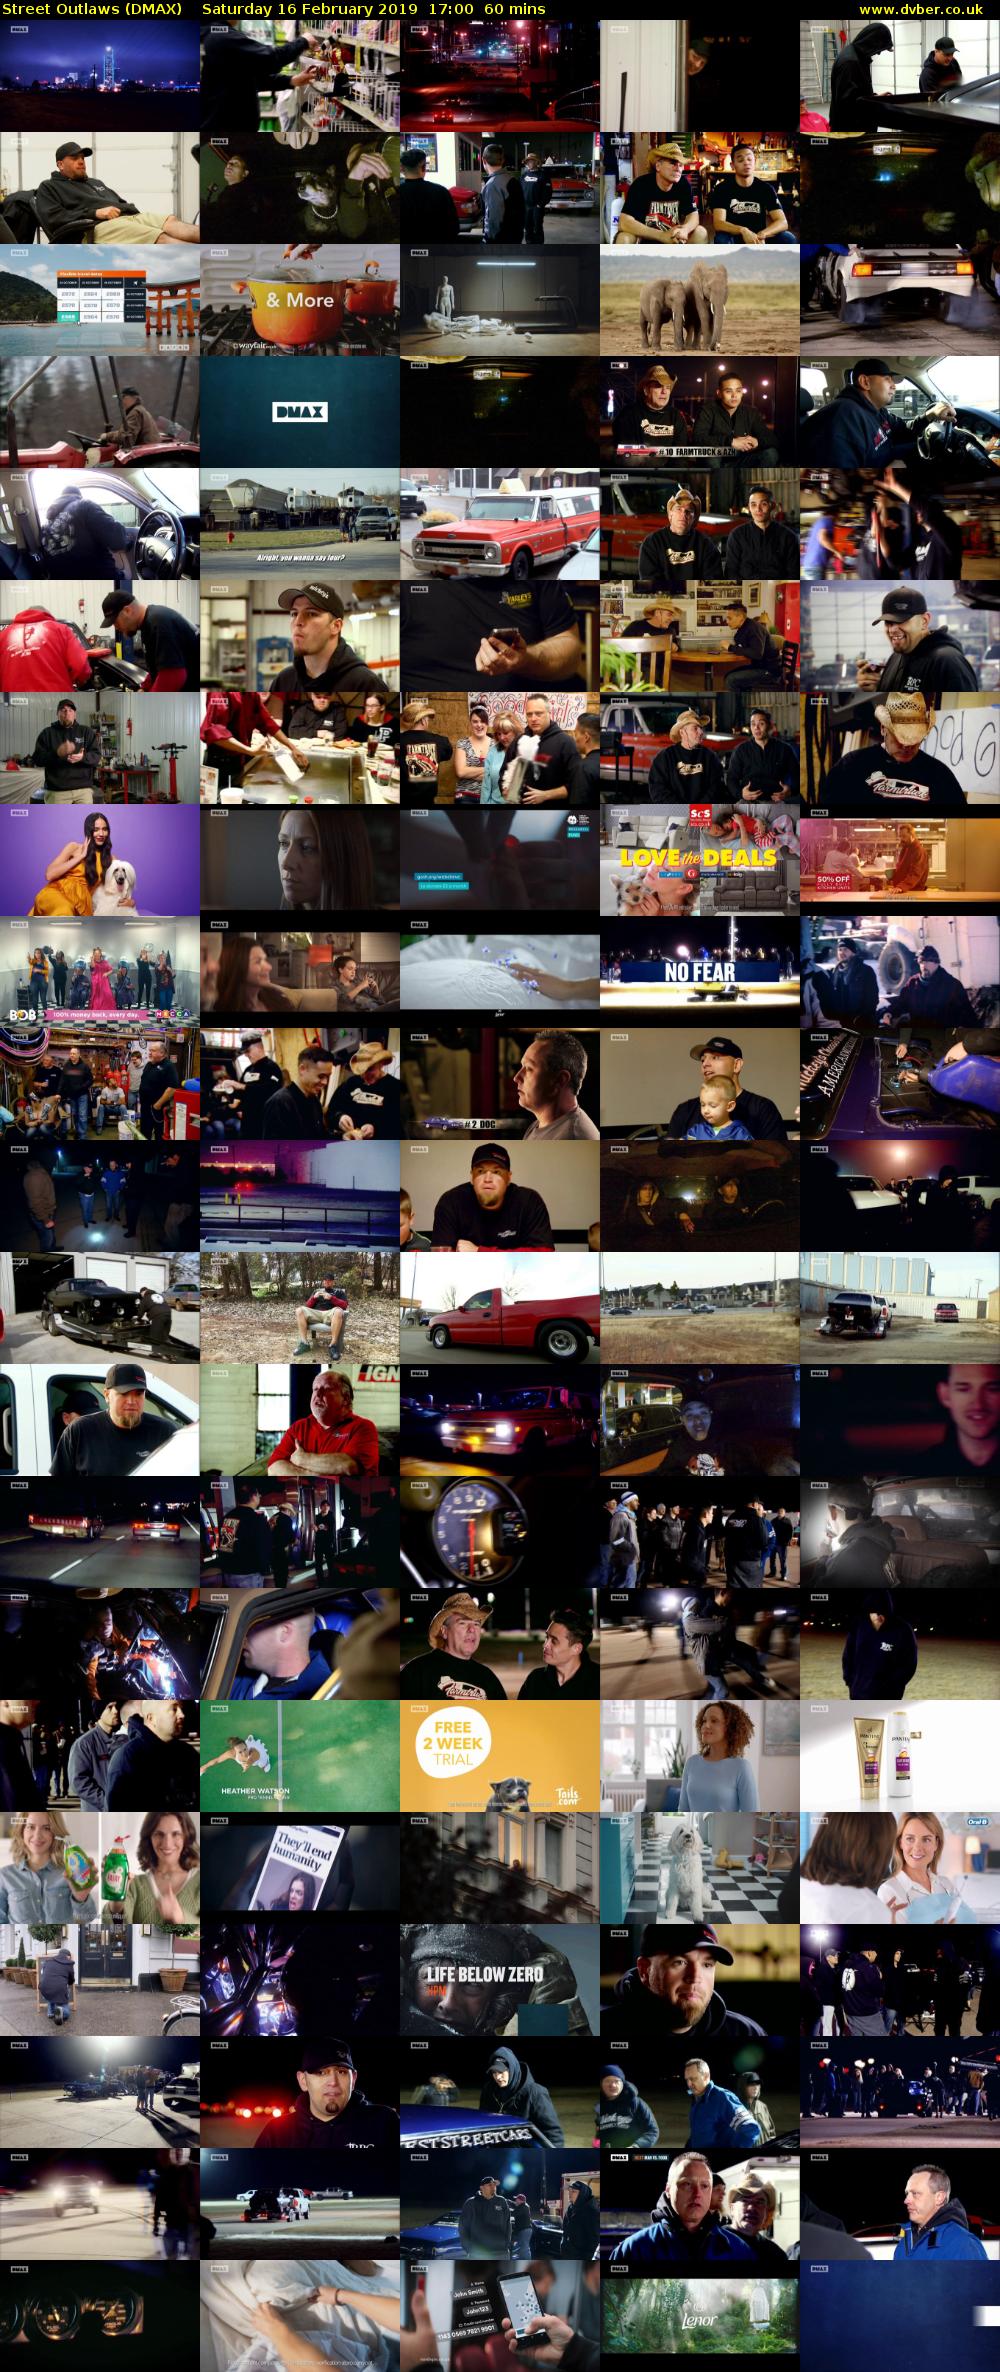 Street Outlaws (DMAX) Saturday 16 February 2019 17:00 - 18:00